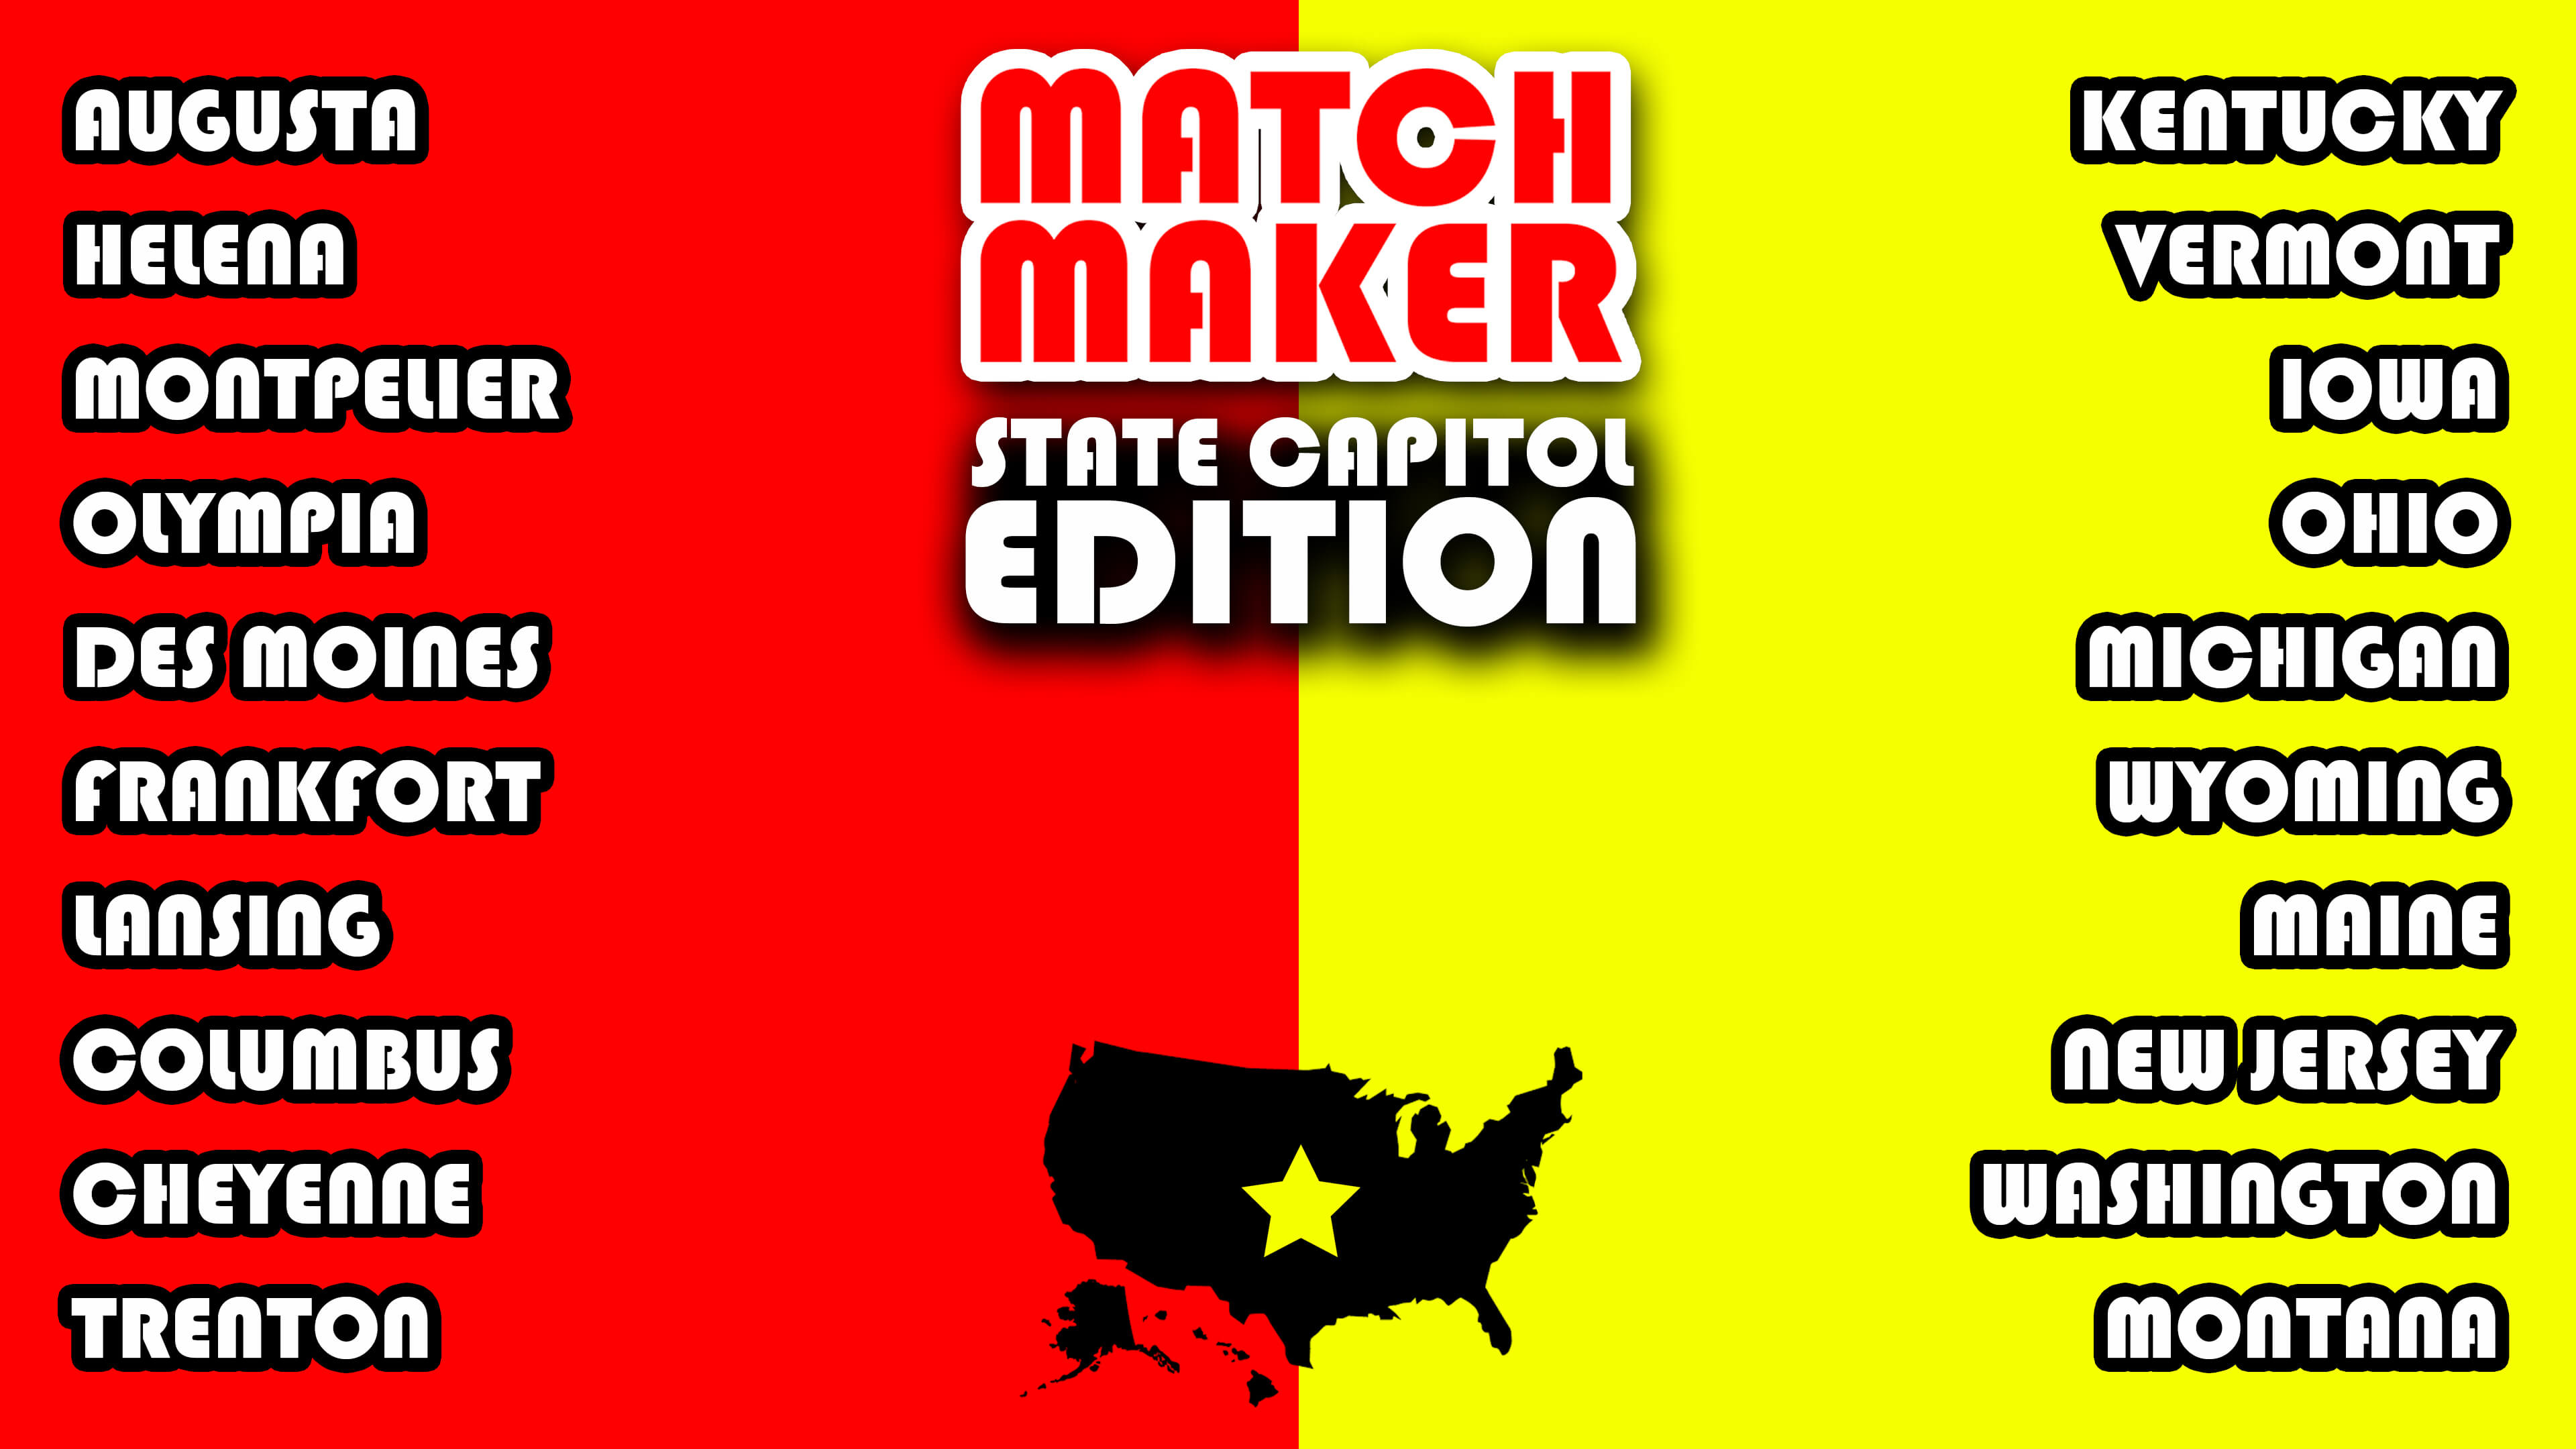 Match Maker: State Capitol Edition